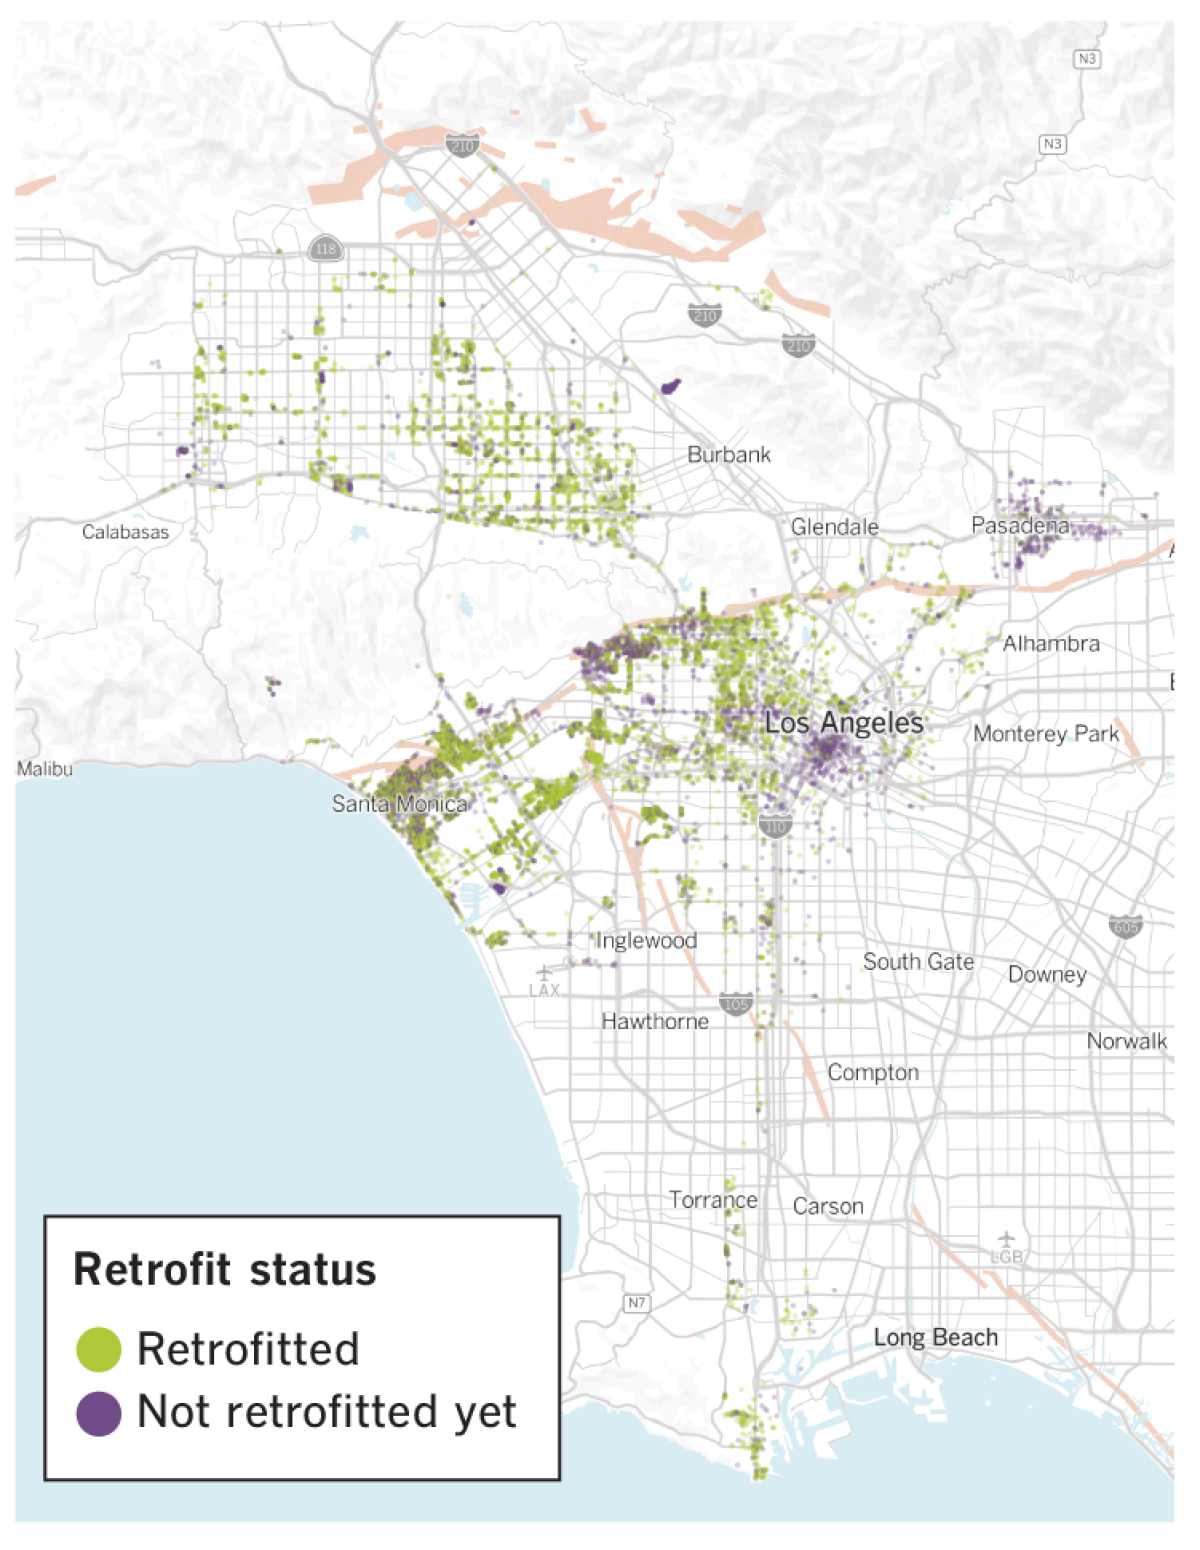 A map shows the locations of retrofitted buildings.